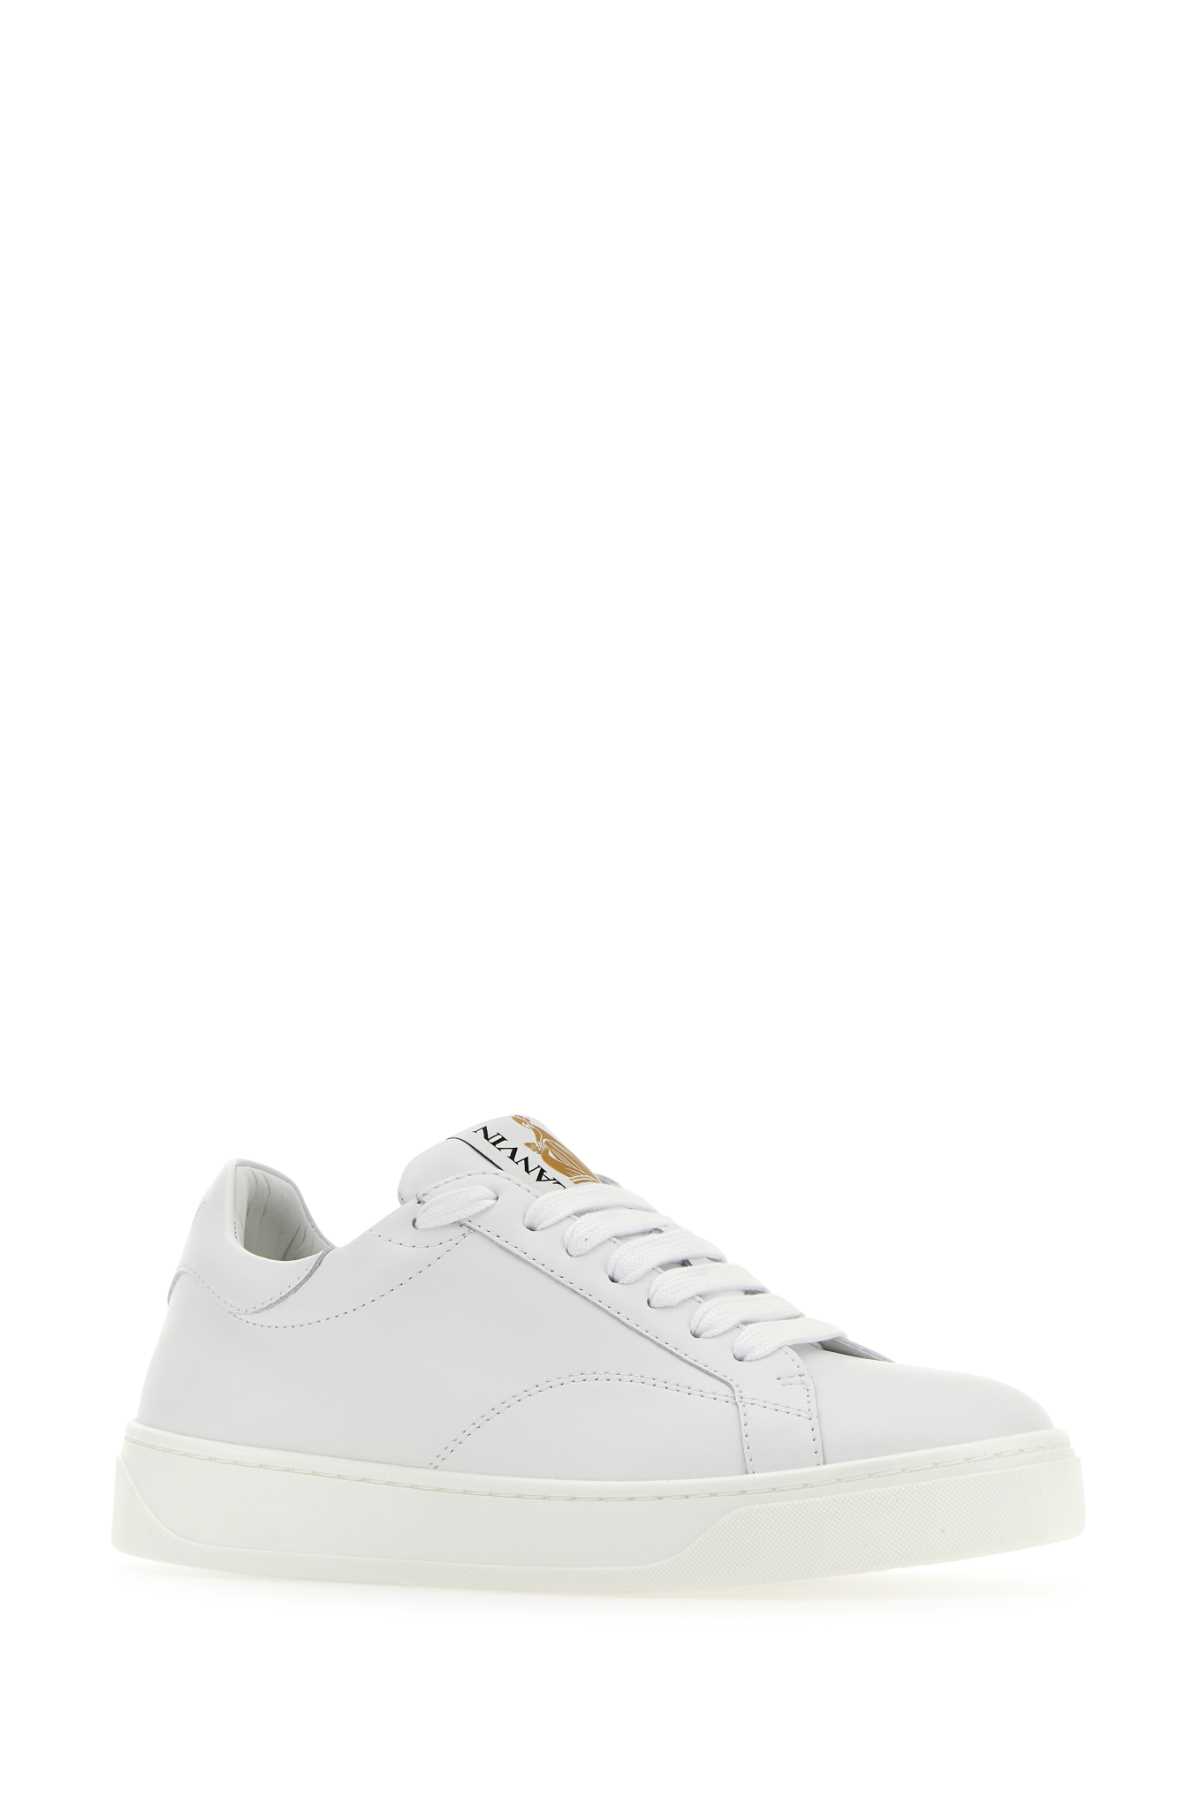 Lanvin White Leather Ddb0 Sneakers In Whitewhite